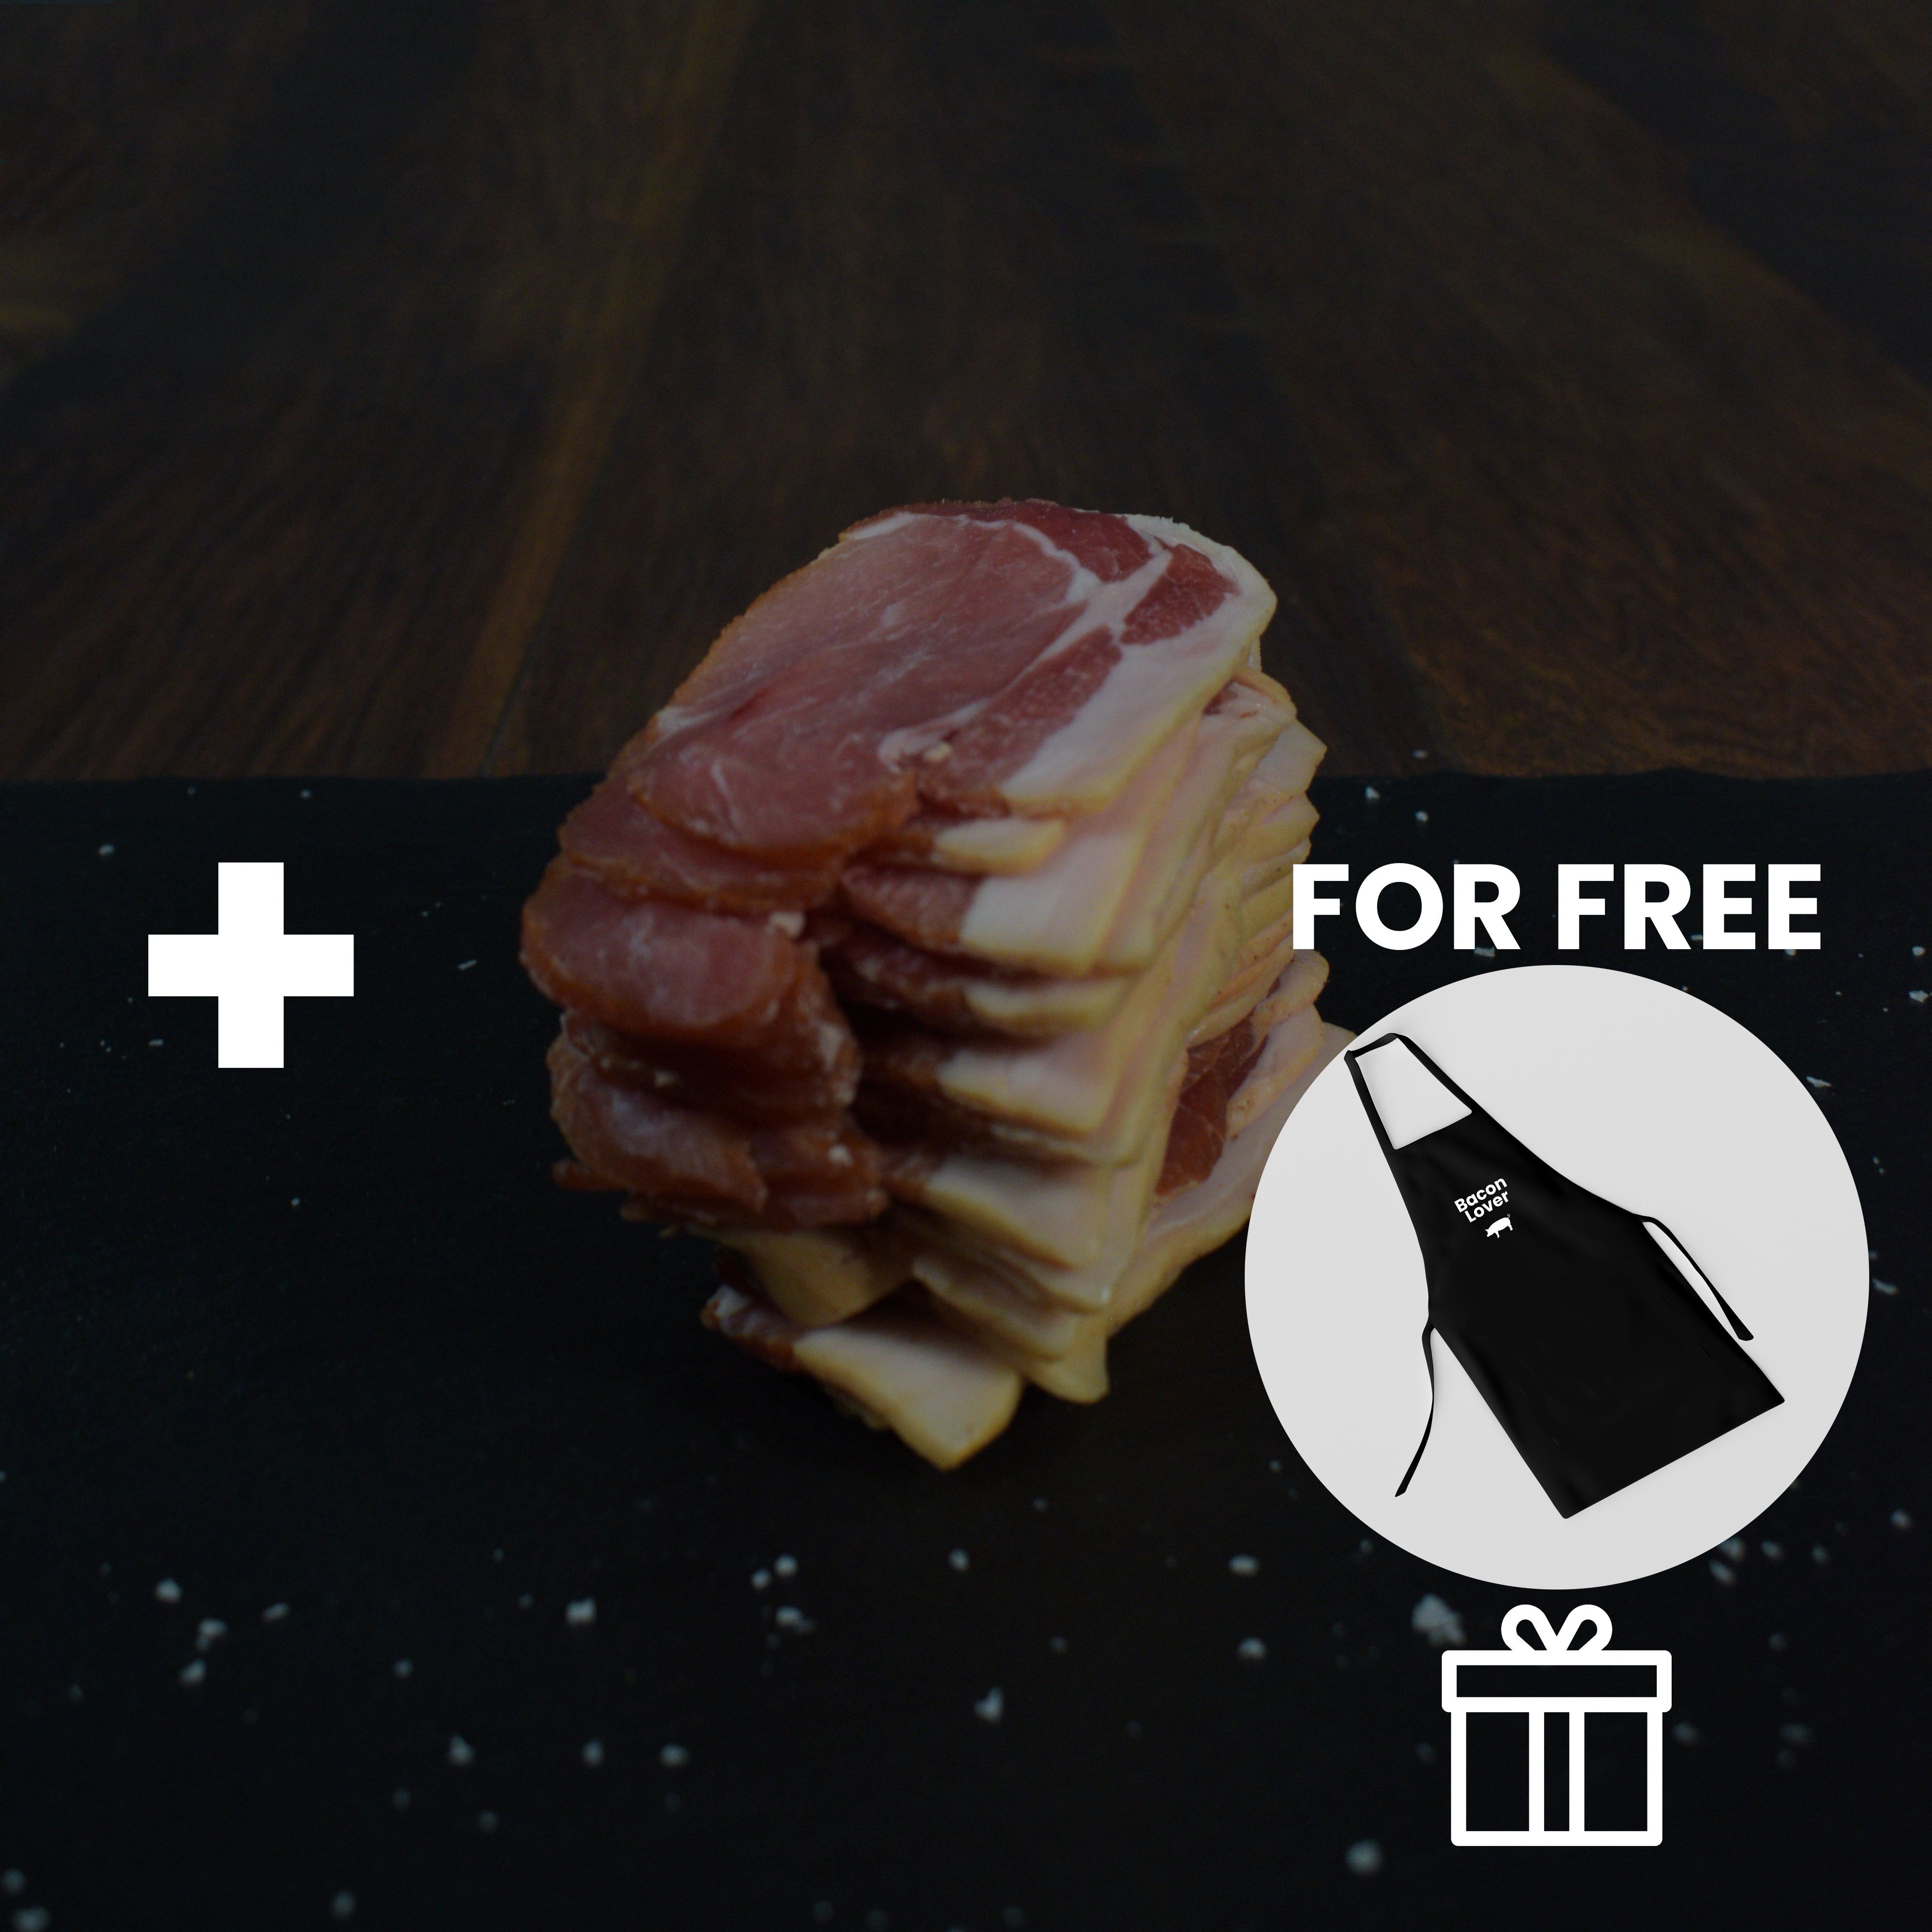 Add another pack of bacon NOW and get a FREE Bacon Lover apron!